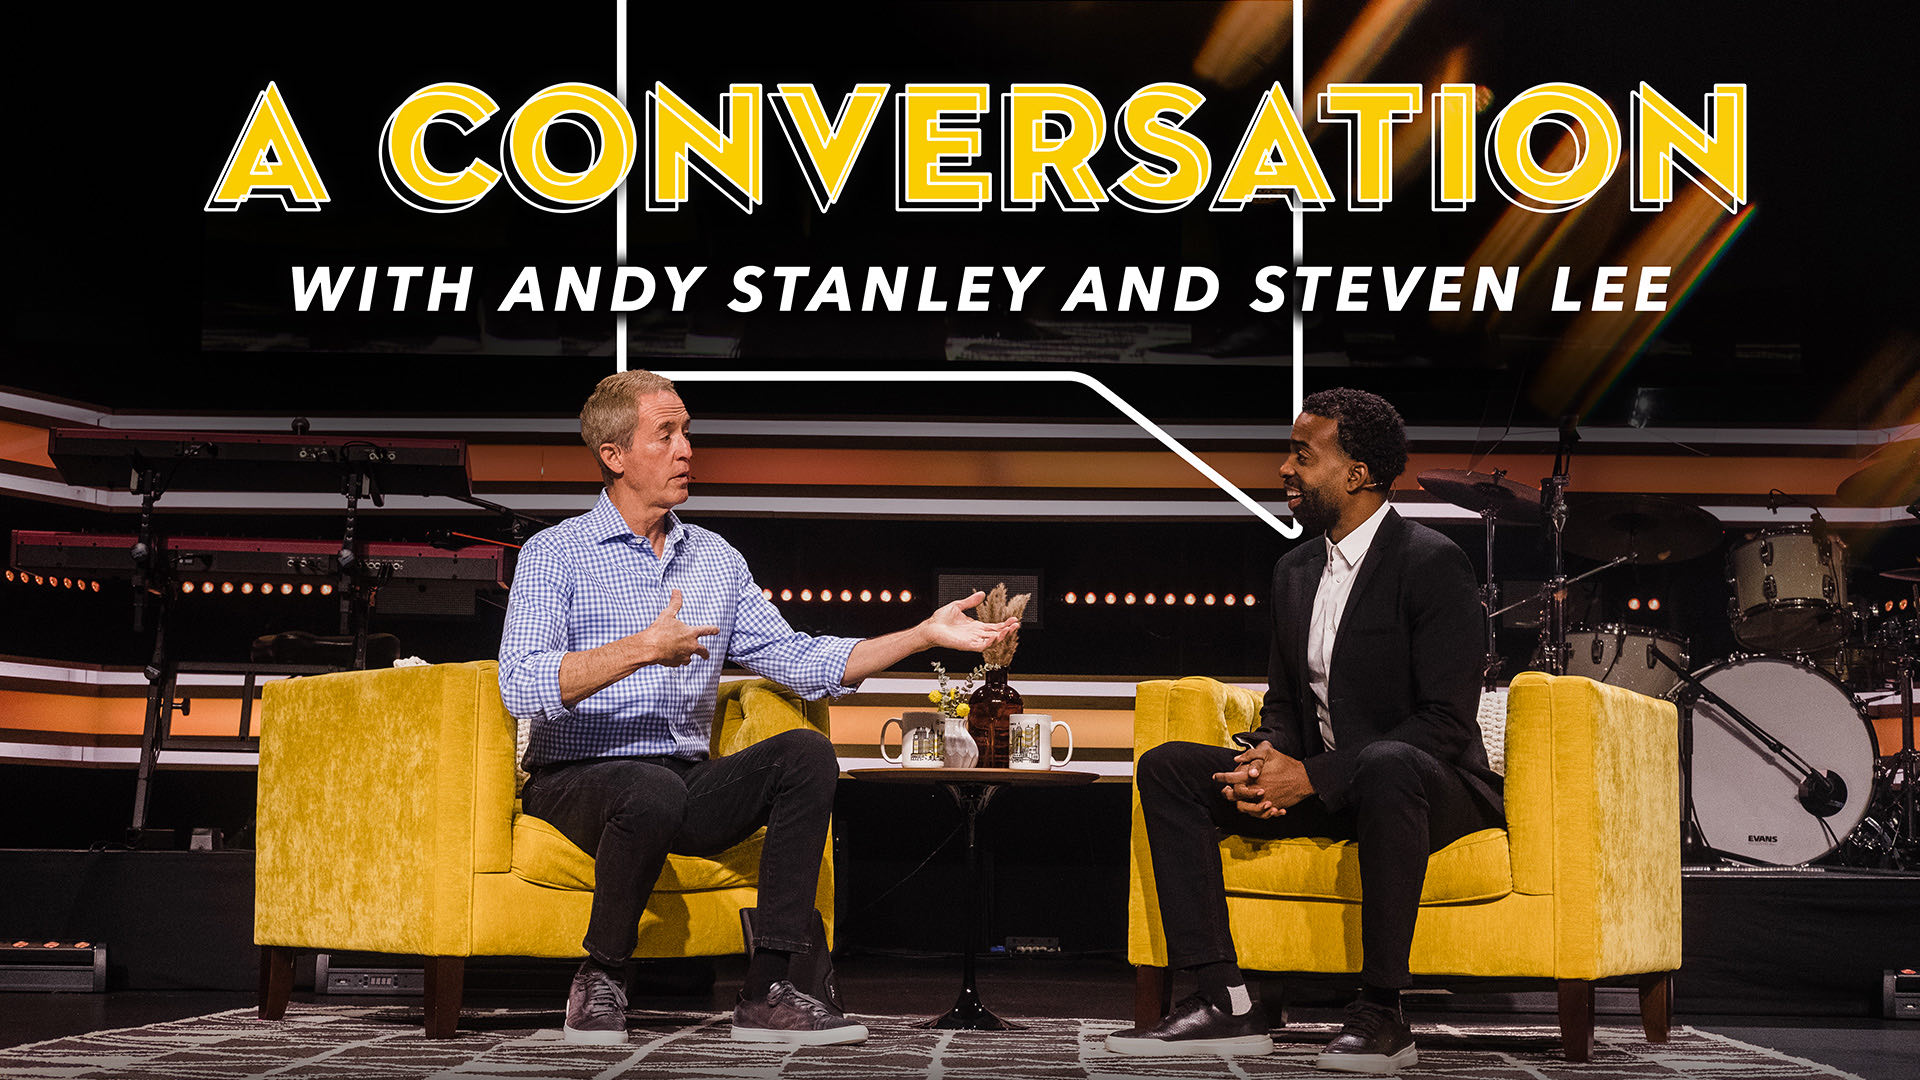 A Conversation with Steven Lee and Andy Stanley